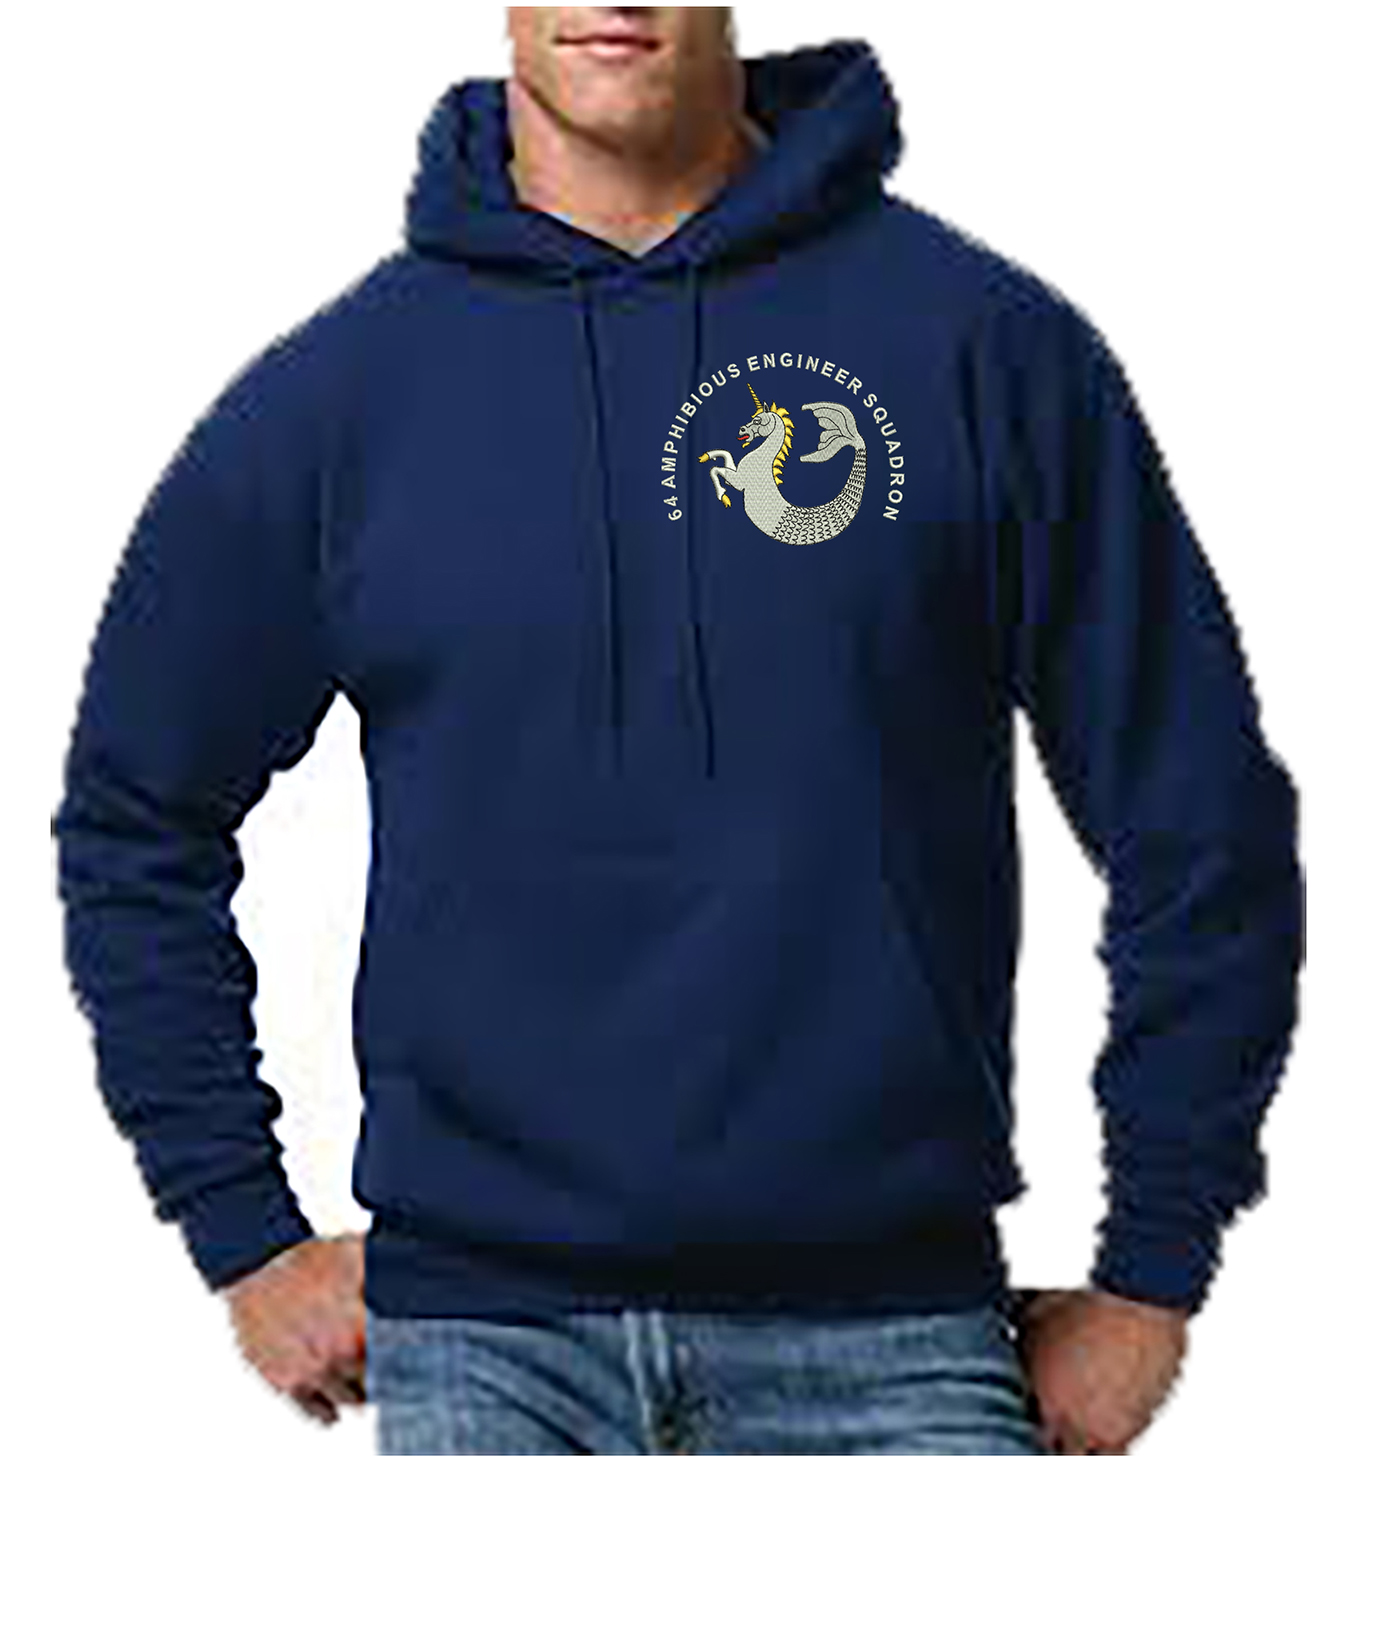 64 Amph Engr Sqn Embroidered Hoodie SMALL BK